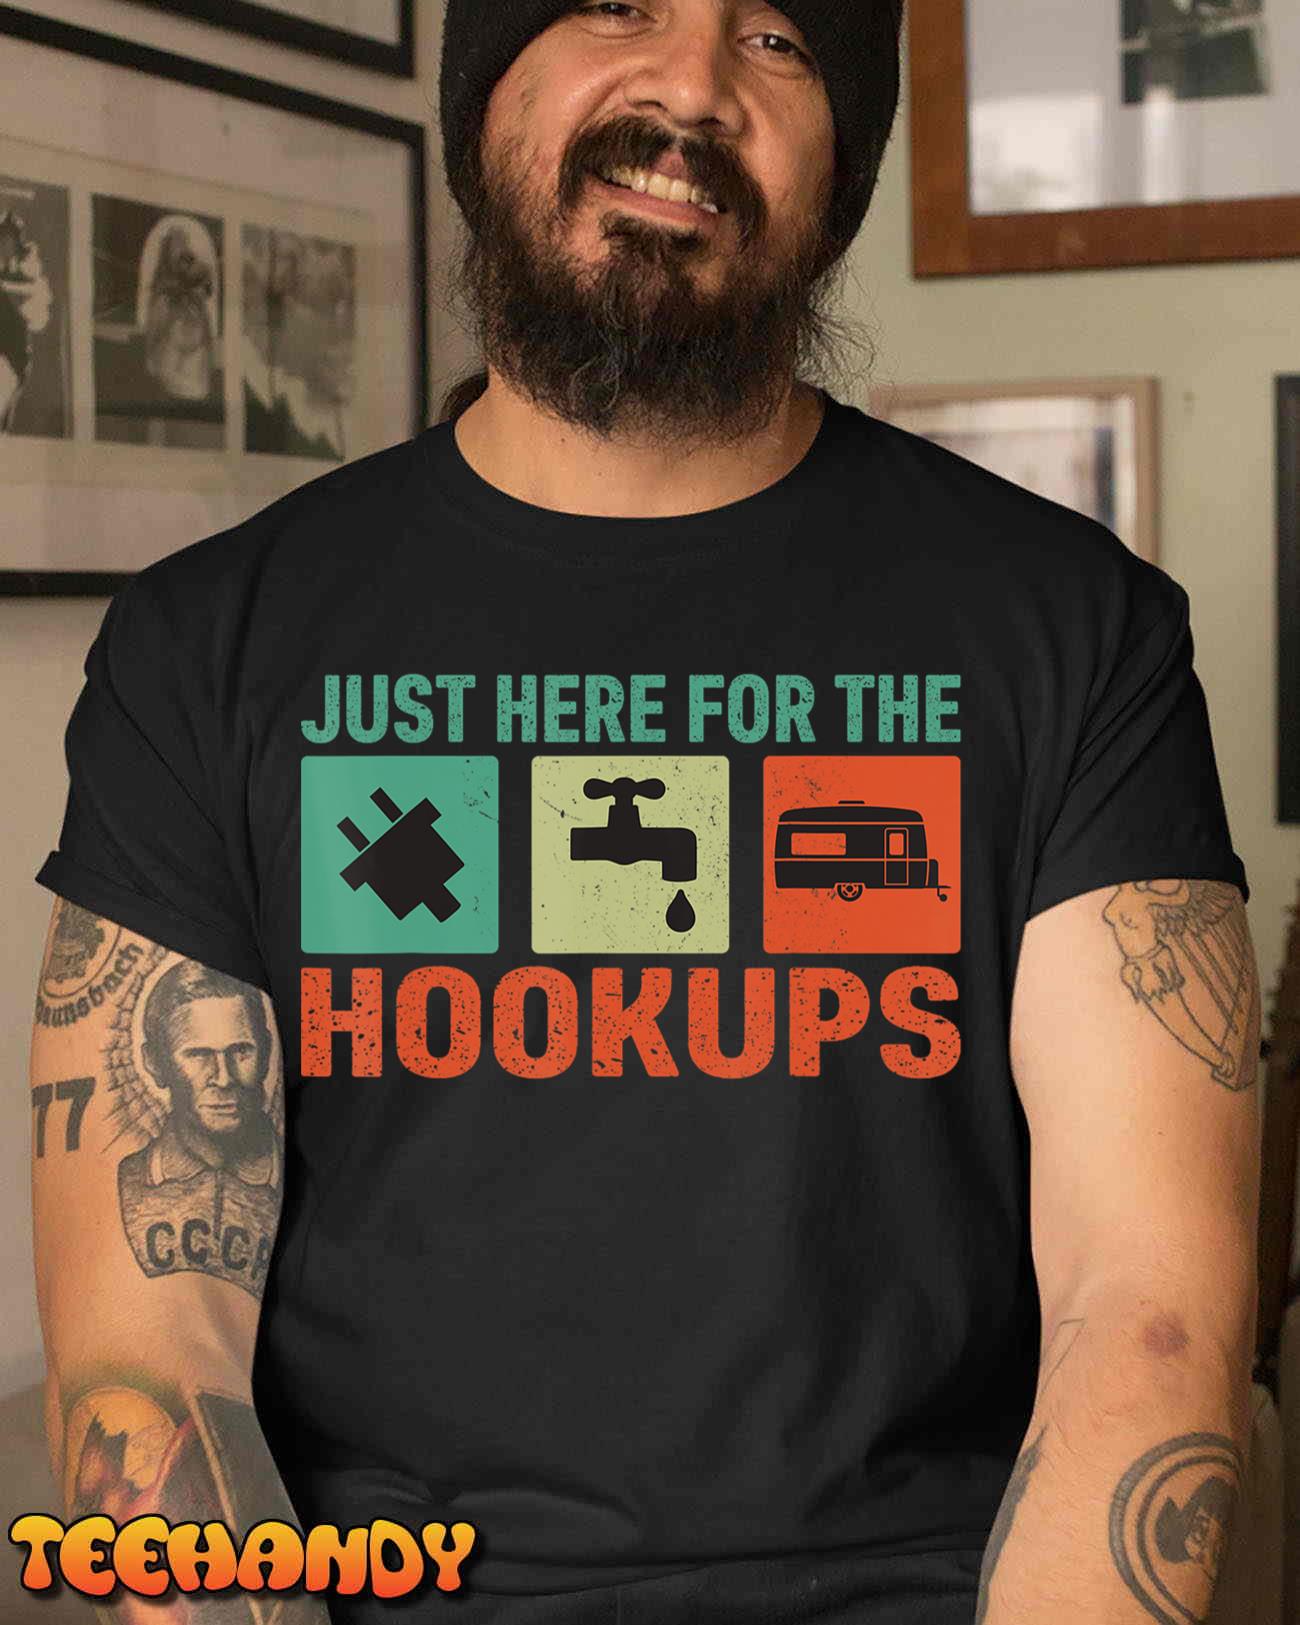 I'm just here for the hookups funny camp rv shirt, hoodie, sweater